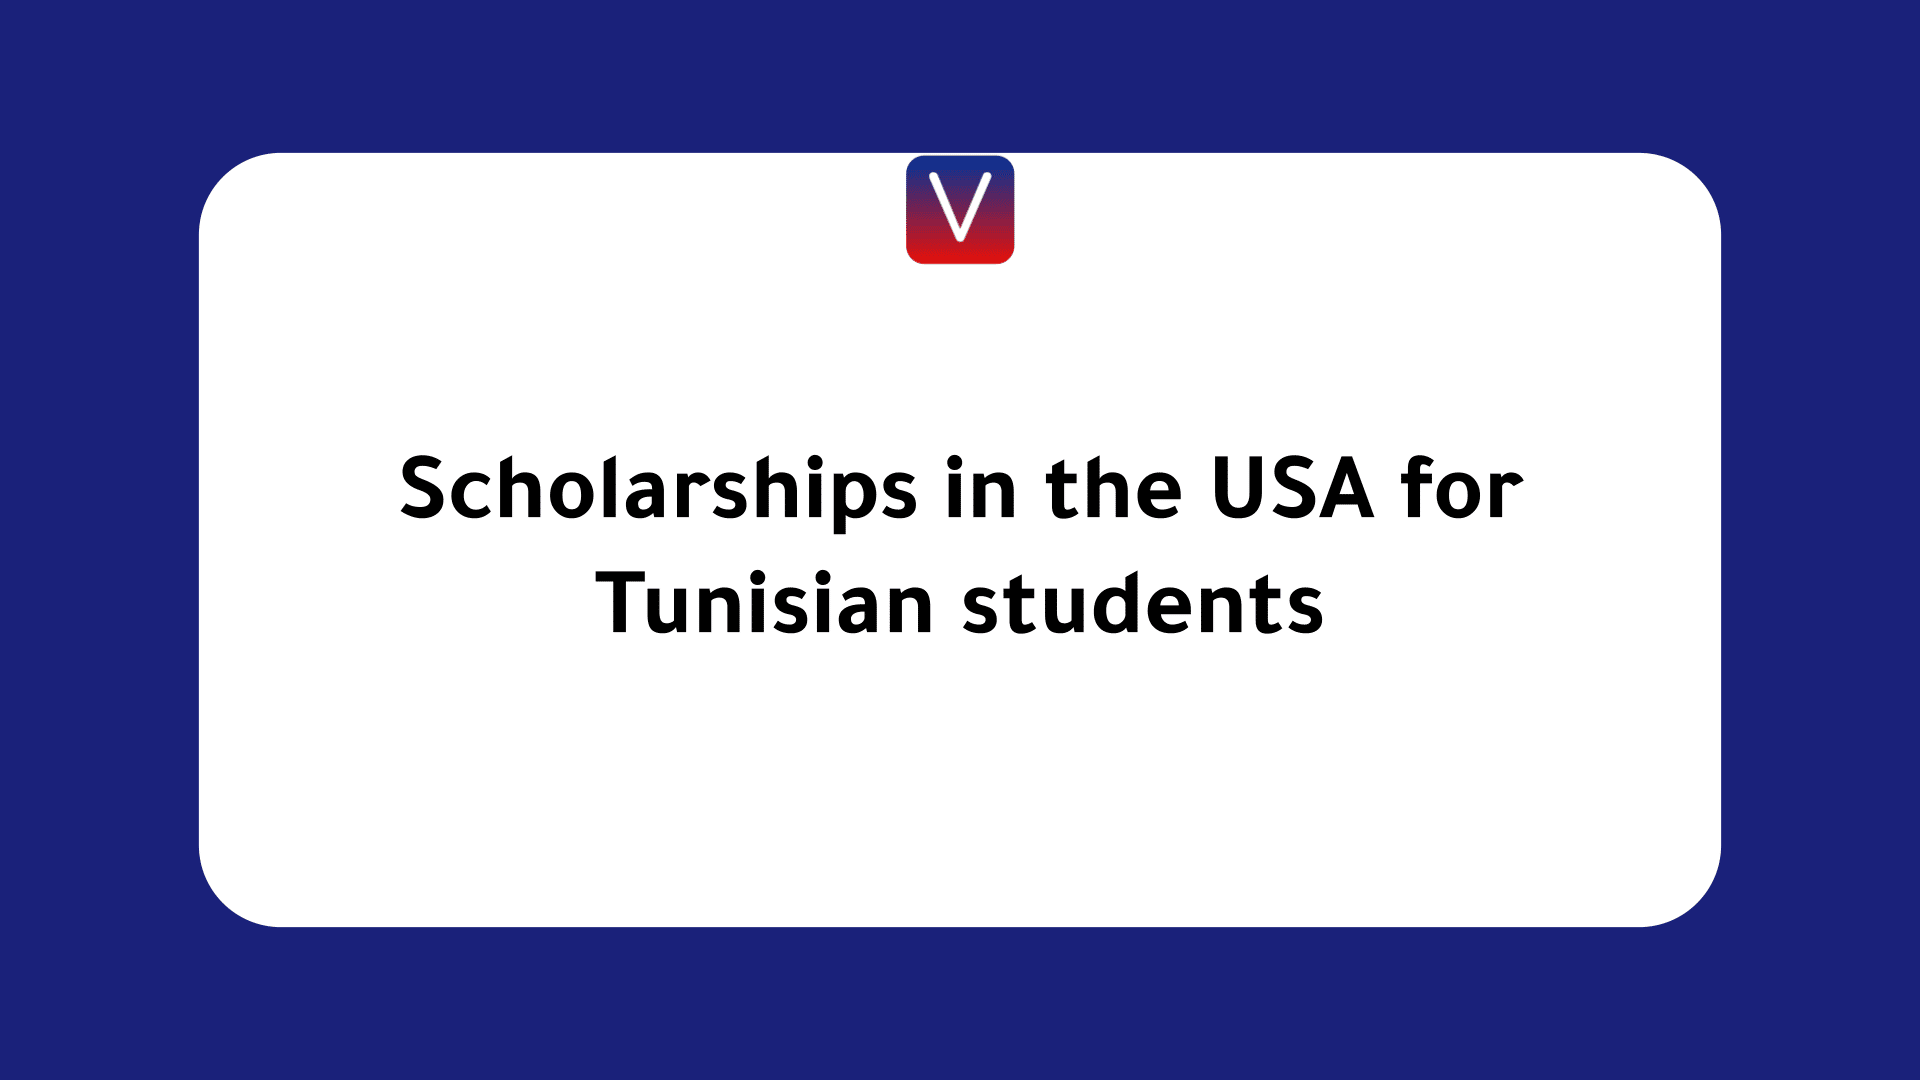 Scholarships in the USA for Tunisian students